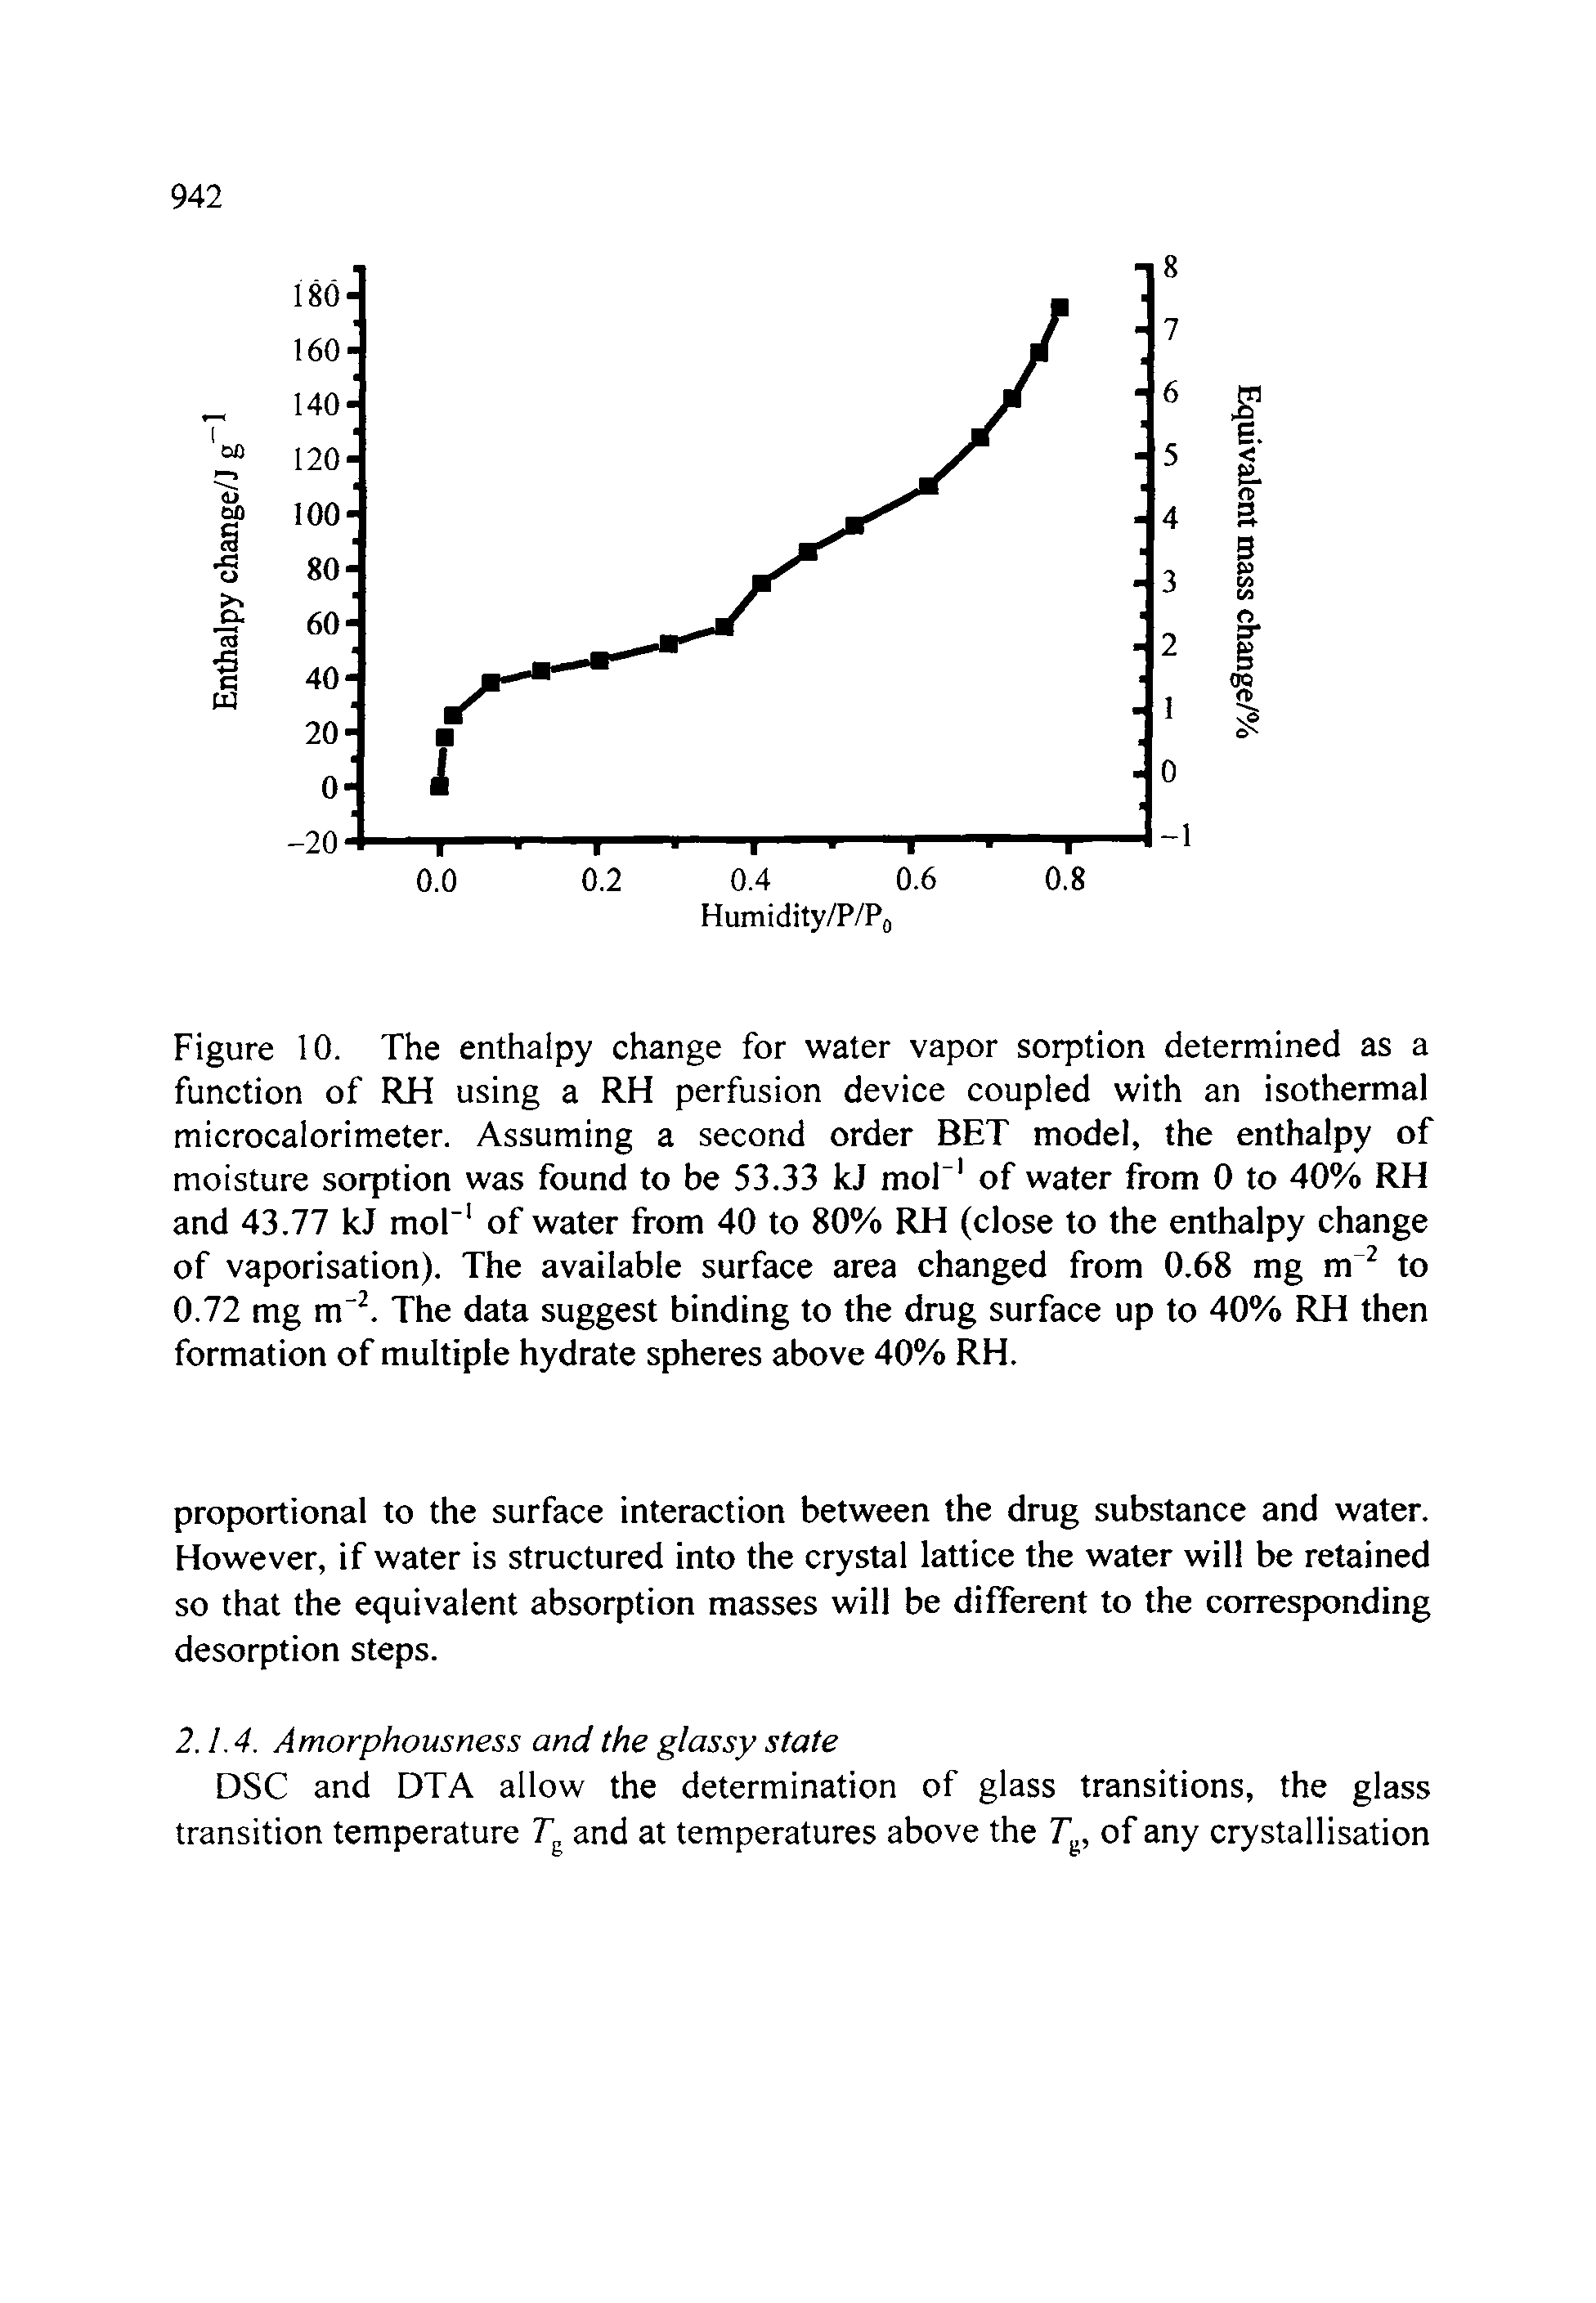 Figure 10. The enthalpy change for water vapor sorption determined as a function of RH using a RH perfusion device coupled with an isothermal microcalorimeter. Assuming a second order BET model, the enthalpy of moisture sorption was found to be 53.33 kJ mol" of water from 0 to 40% RH and 43.77 kJ mol" of water from 40 to 80% RH (close to the enthalpy change of vaporisation). The available surface area changed from 0.68 mg m to 0.72 mg m". The data suggest binding to the drug surface up to 40% RH then formation of multiple hydrate spheres above 40% RH.